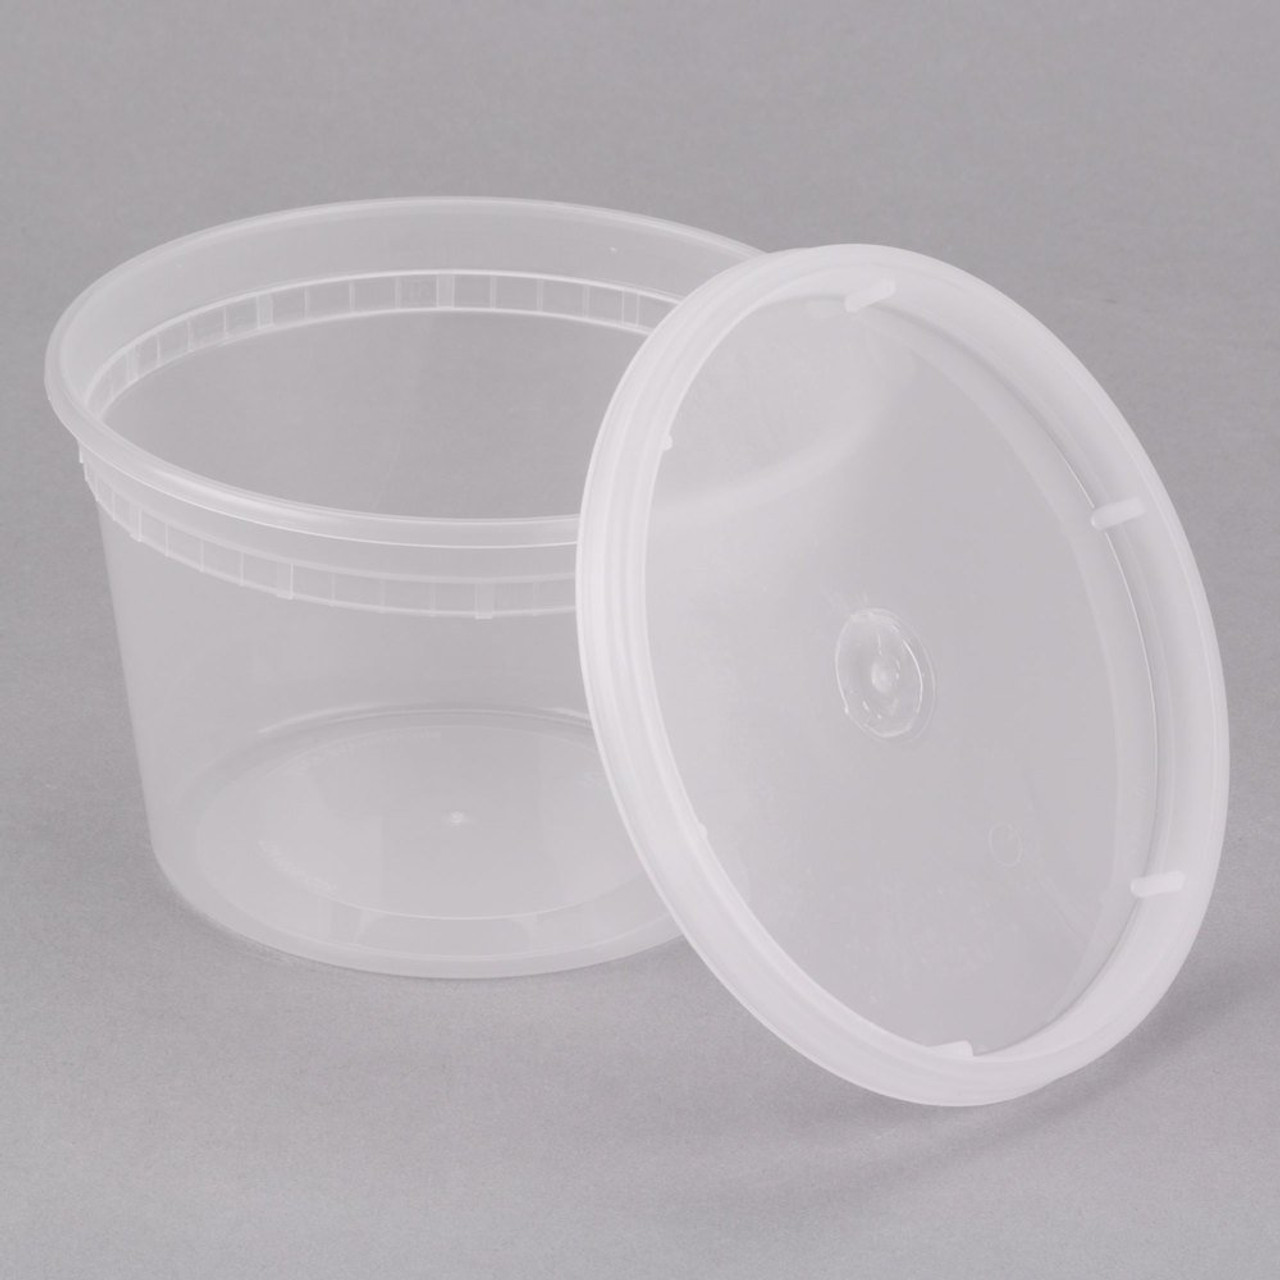 32 oz Microwavable Translucent Plastic Deli Container and Lid